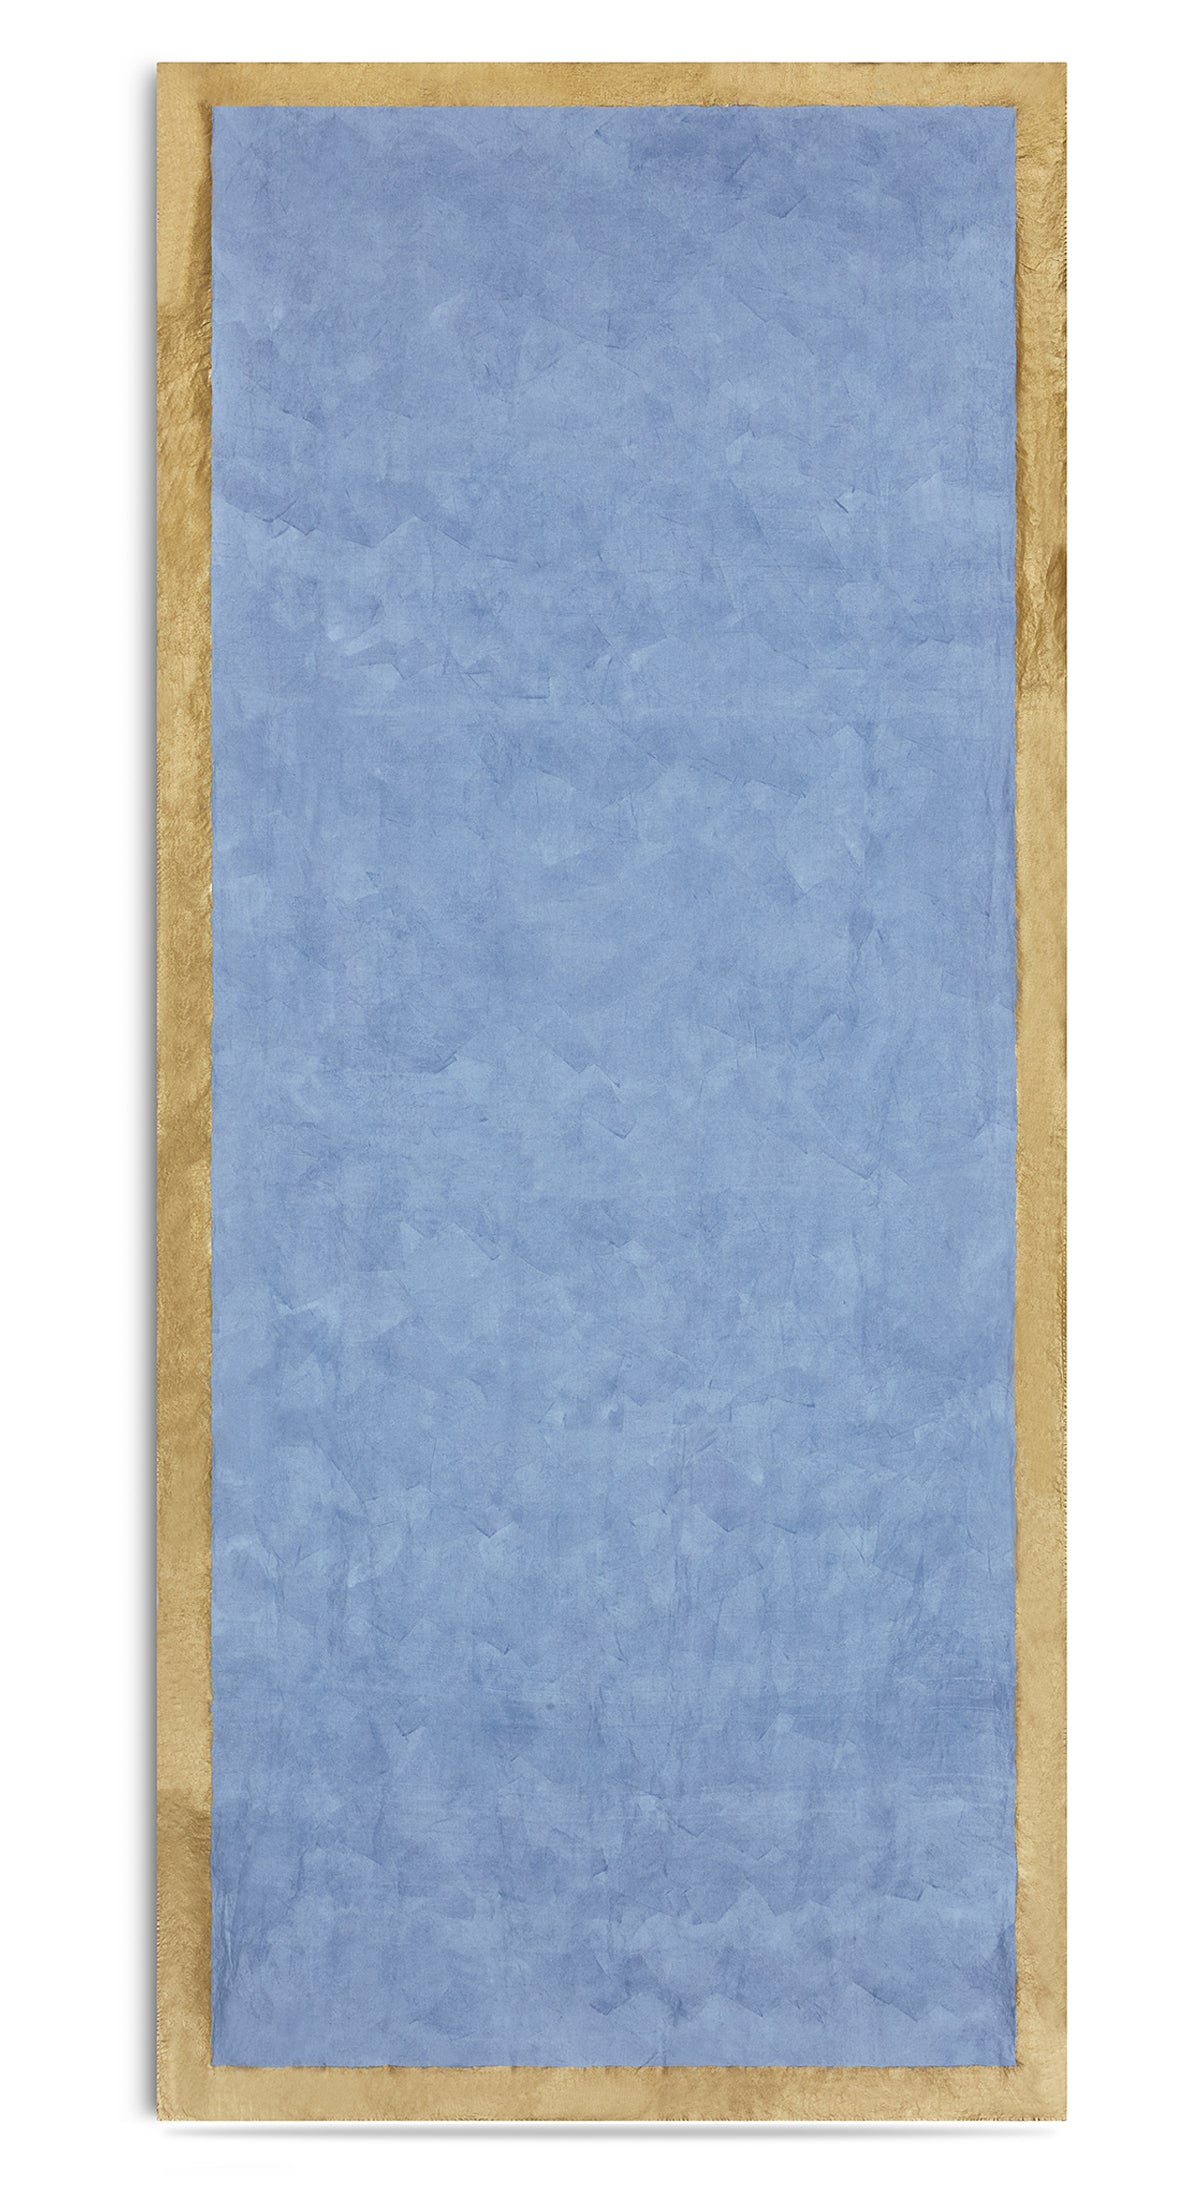 Gold Edge Linen Tablecloth in Pale Blue